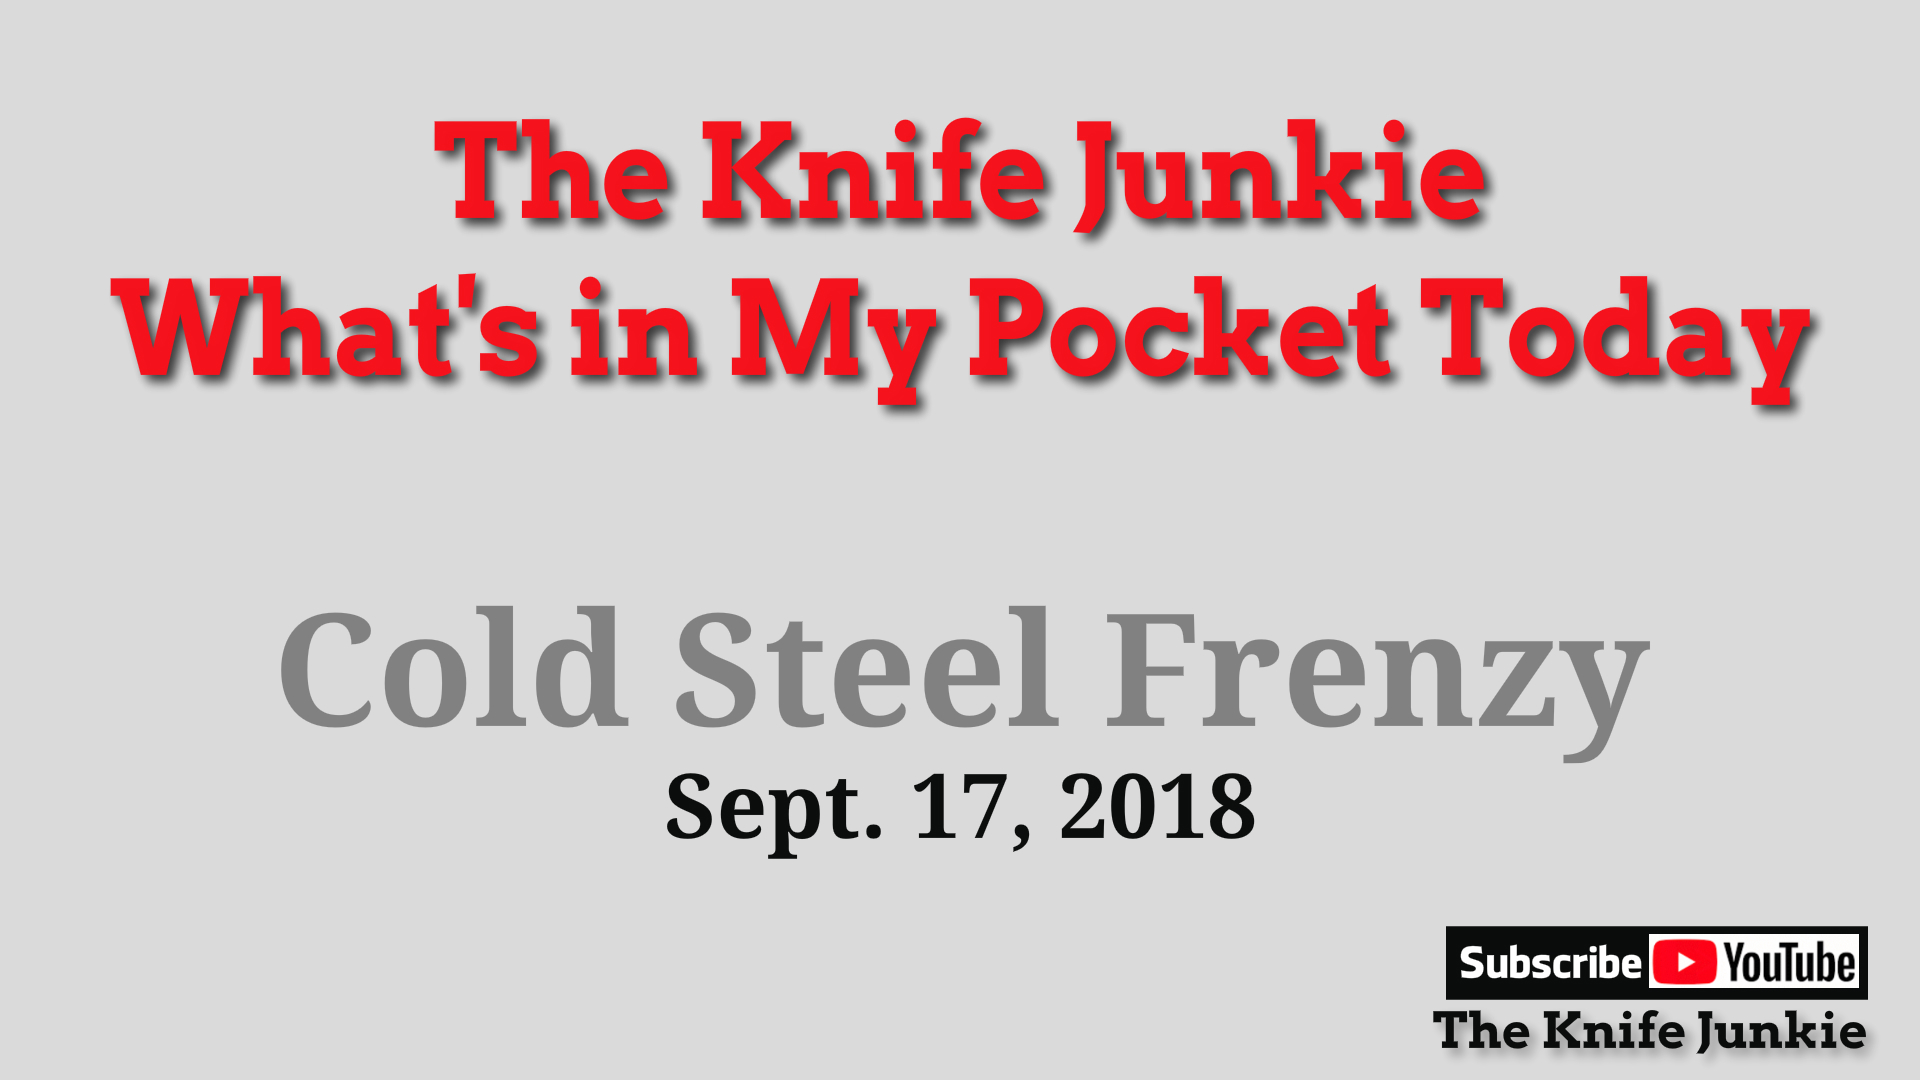 Cold Steel Frenzy